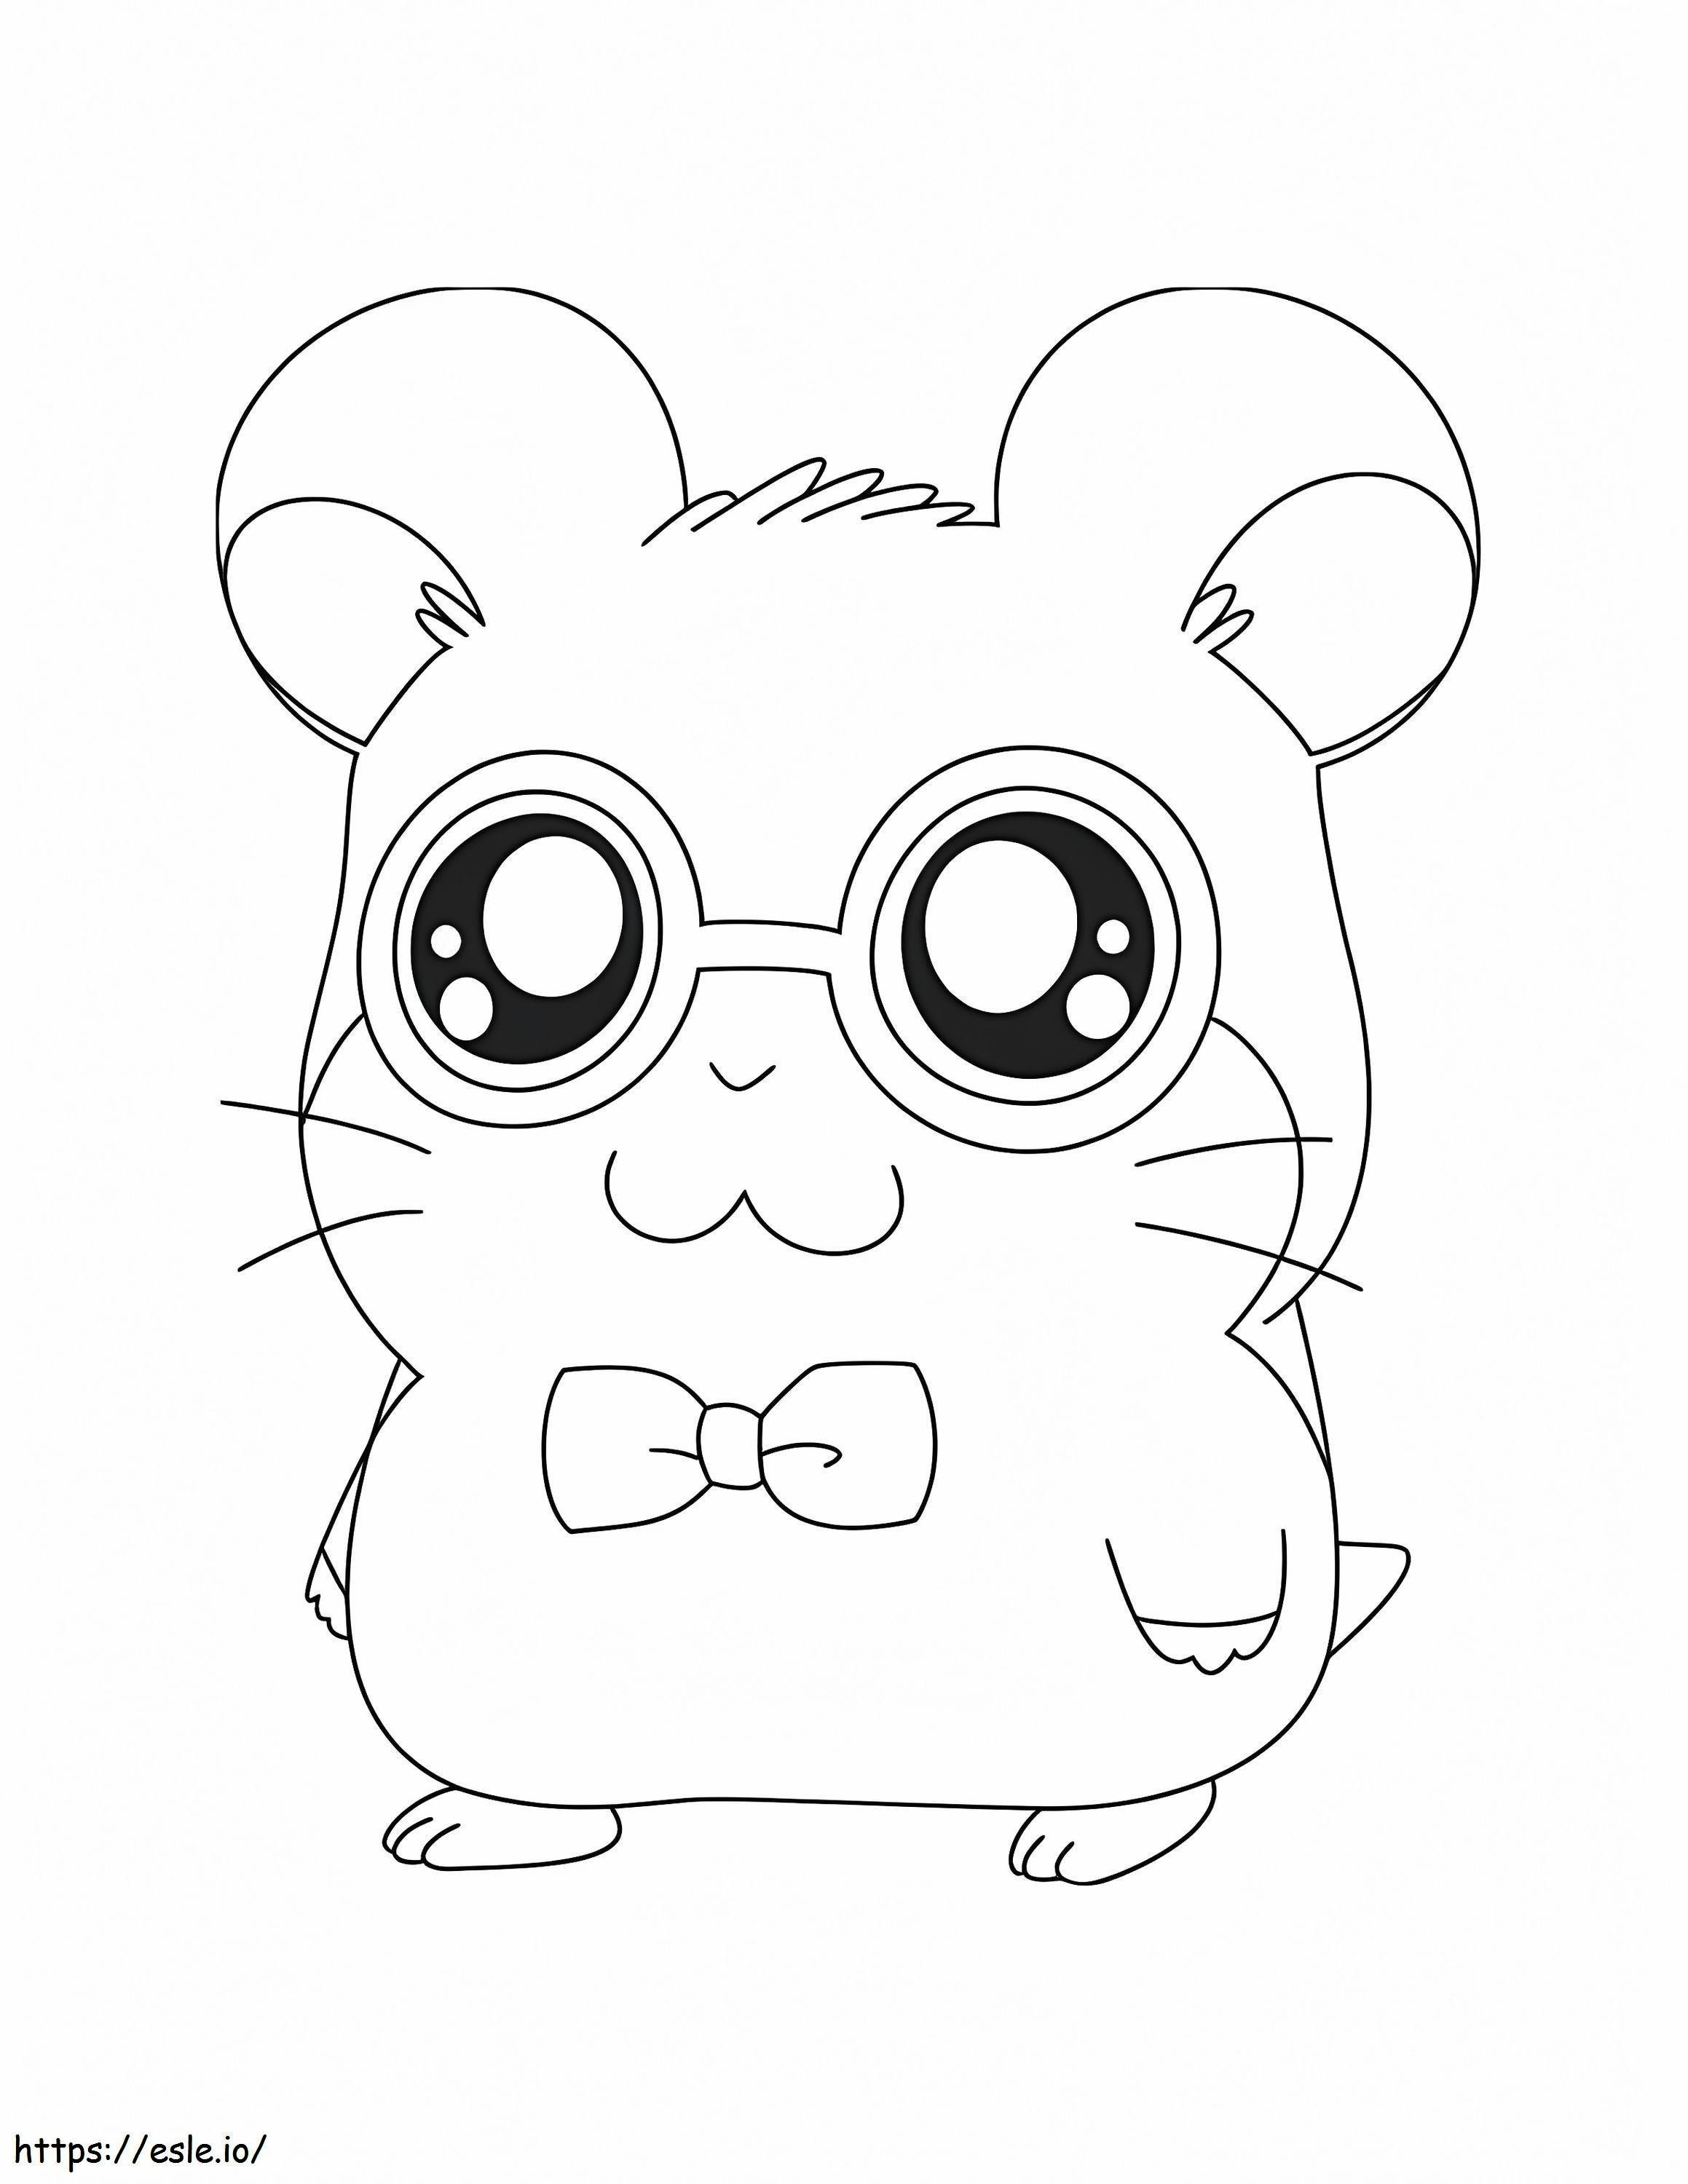 Cute Mouse Smiling coloring page